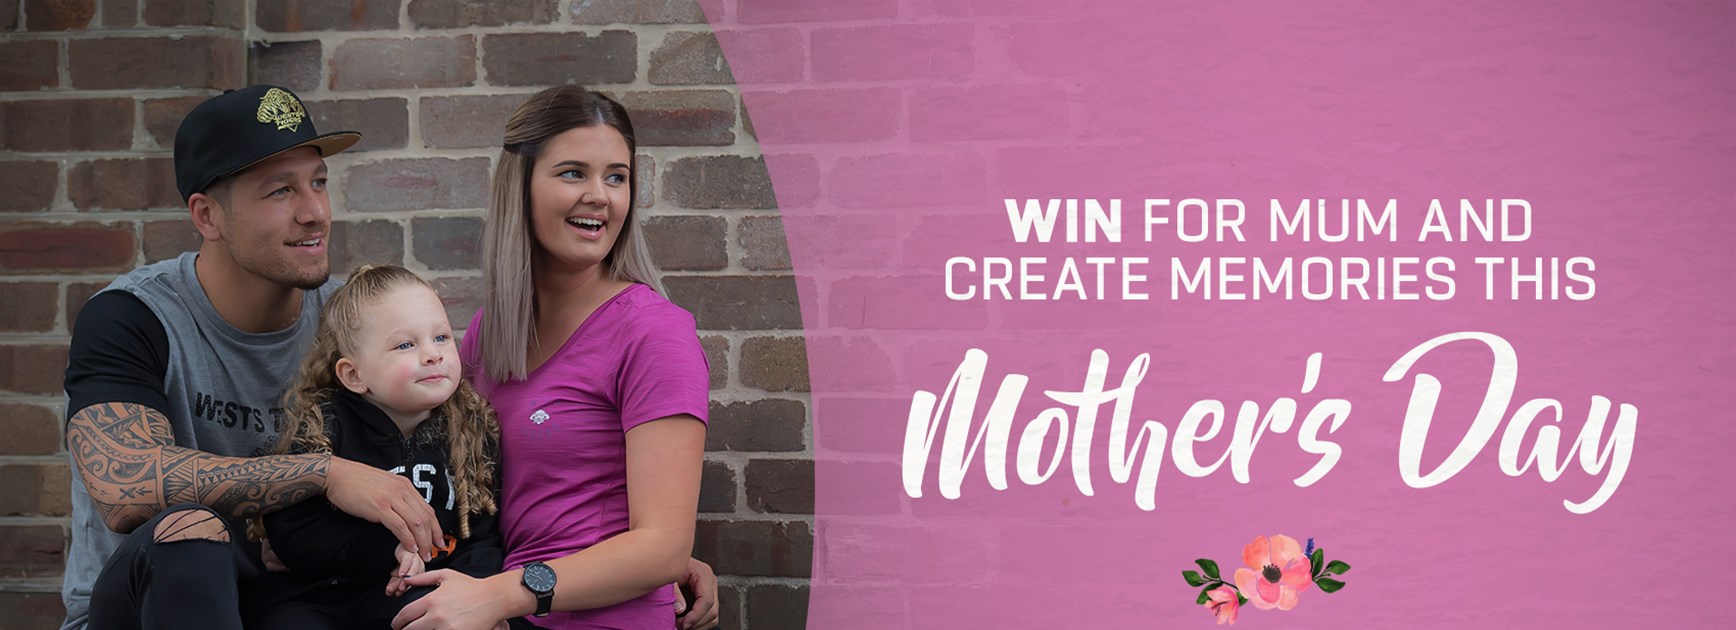 Win the ultimate present for Mum this Mother's Day!